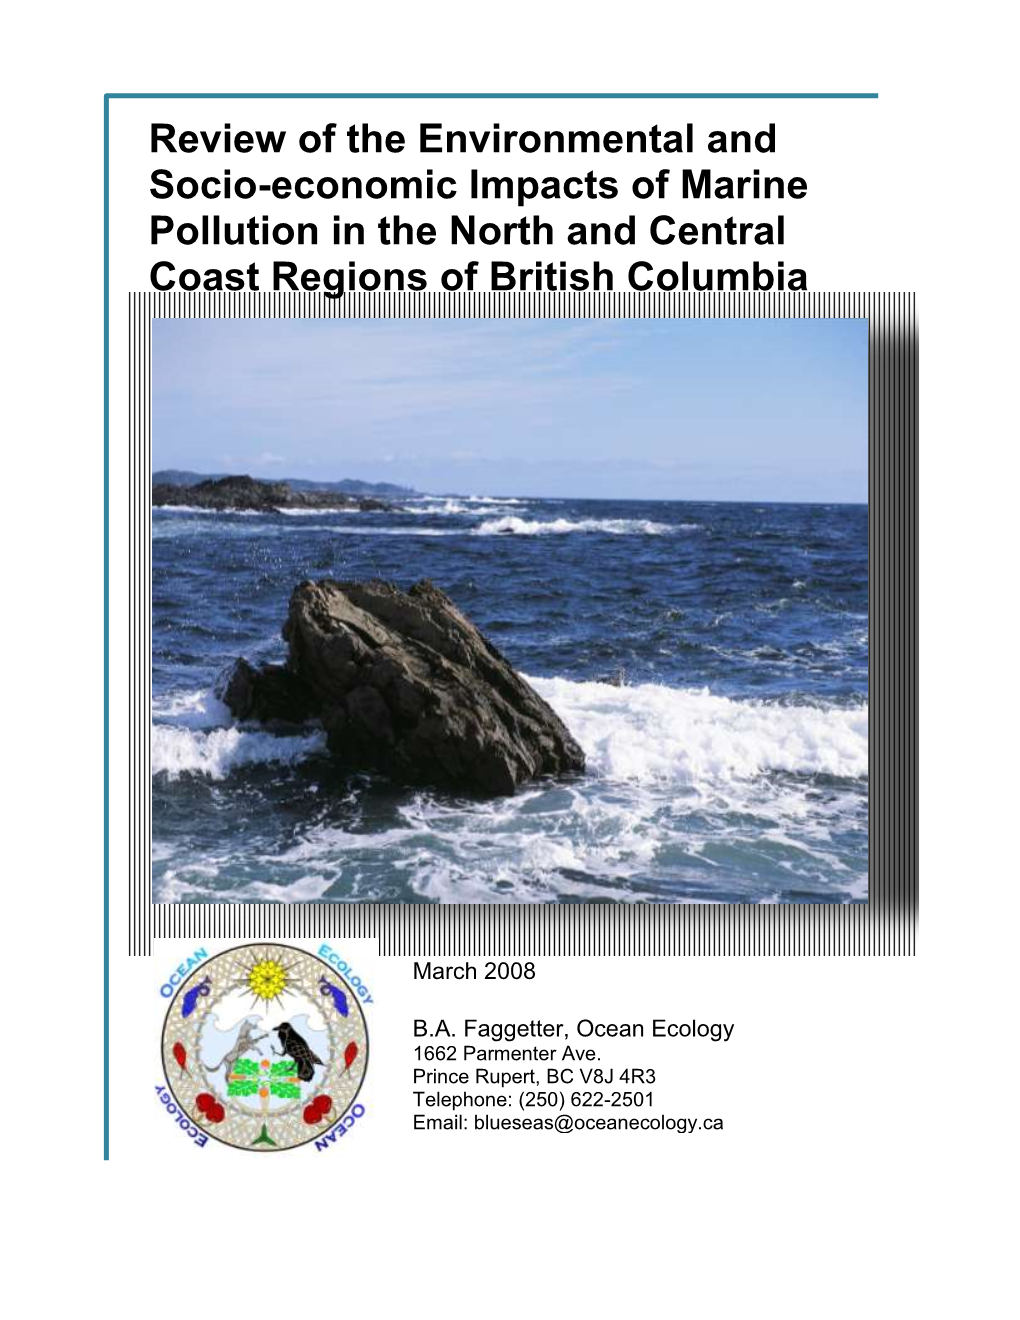 Review of the Environmental and Socio-Economic Impacts of Marine Pollution in the North and Central Coast Regions of British Columbia